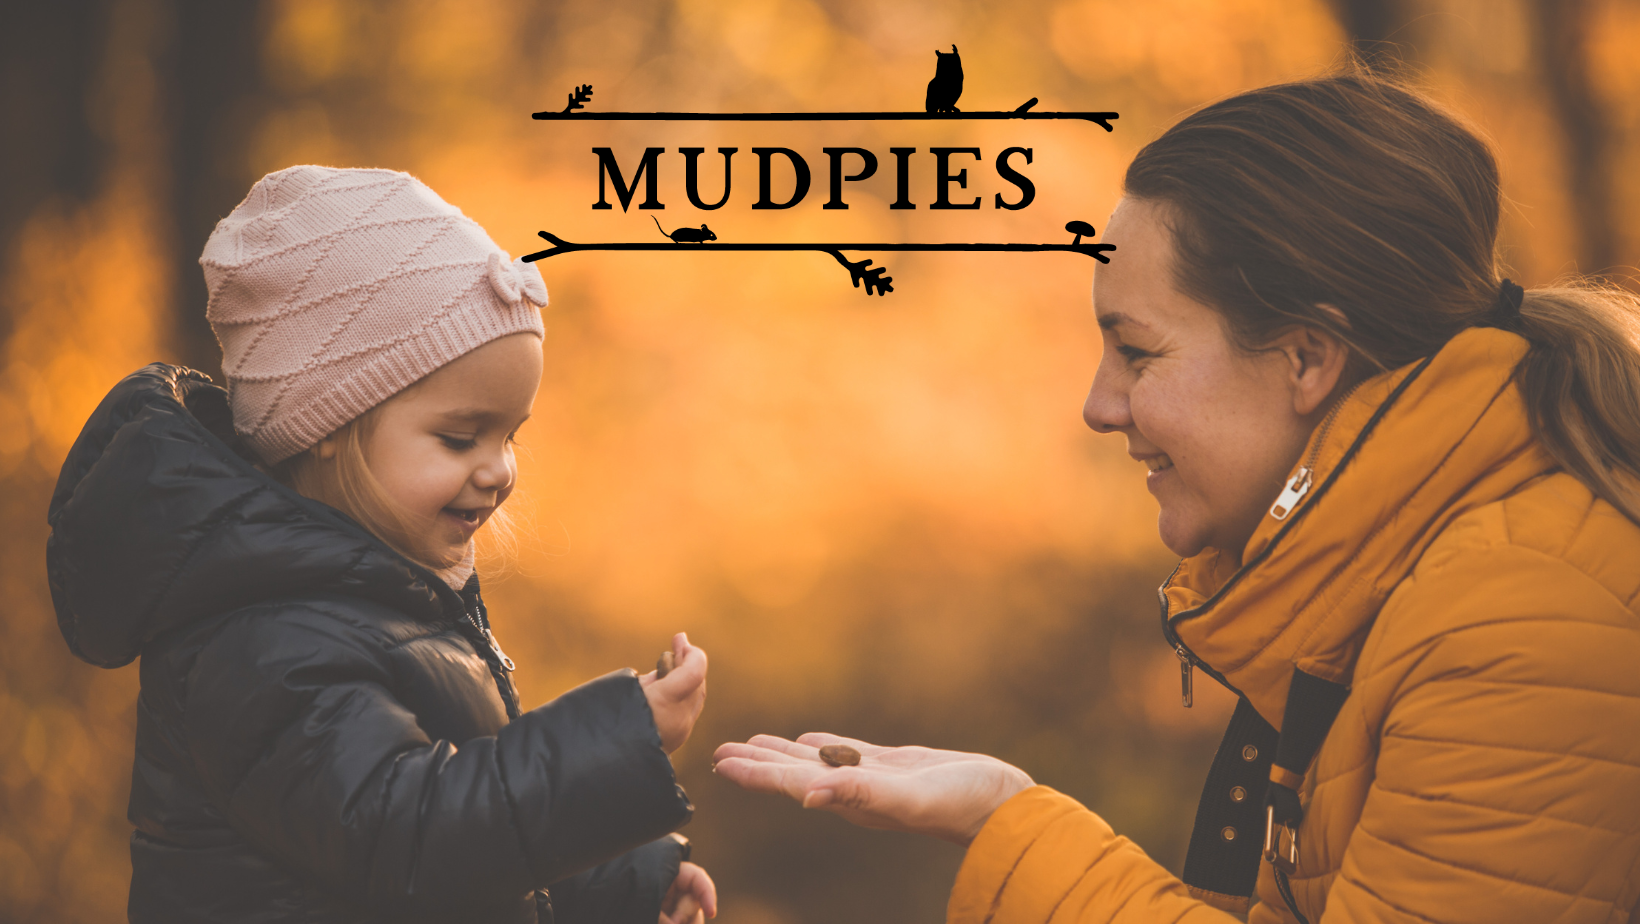 An image of a young girl and her mother smiling at one another overlayed by the Mudpies logo.